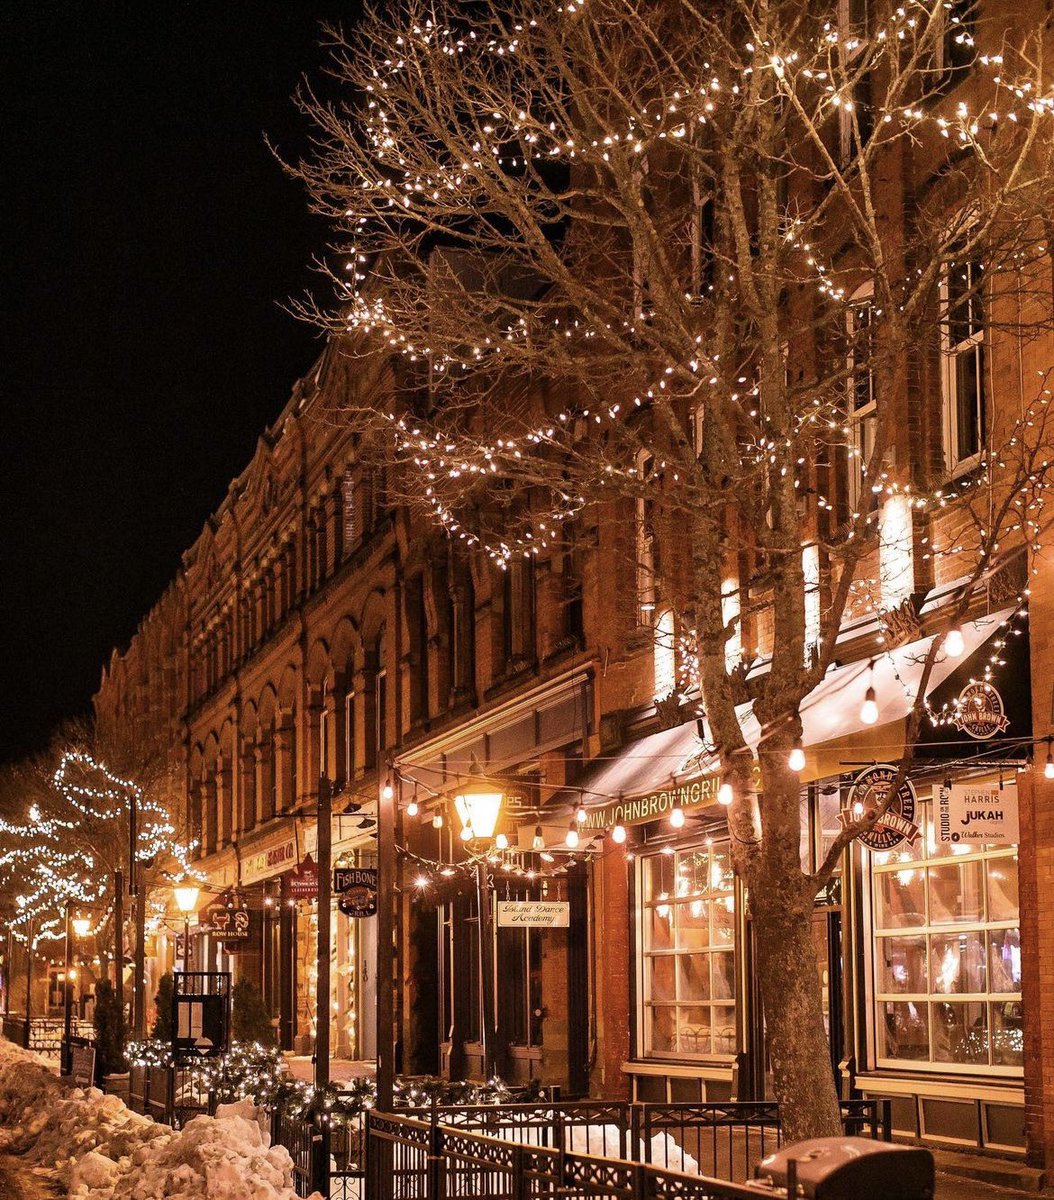 Flying into YYG this December? ✈️ 💙 Here’s a glimpse at what’s going on in Charlottetown this holiday season. 👇 discovercharlottetown.com/events/christm… @CharlottetownPE